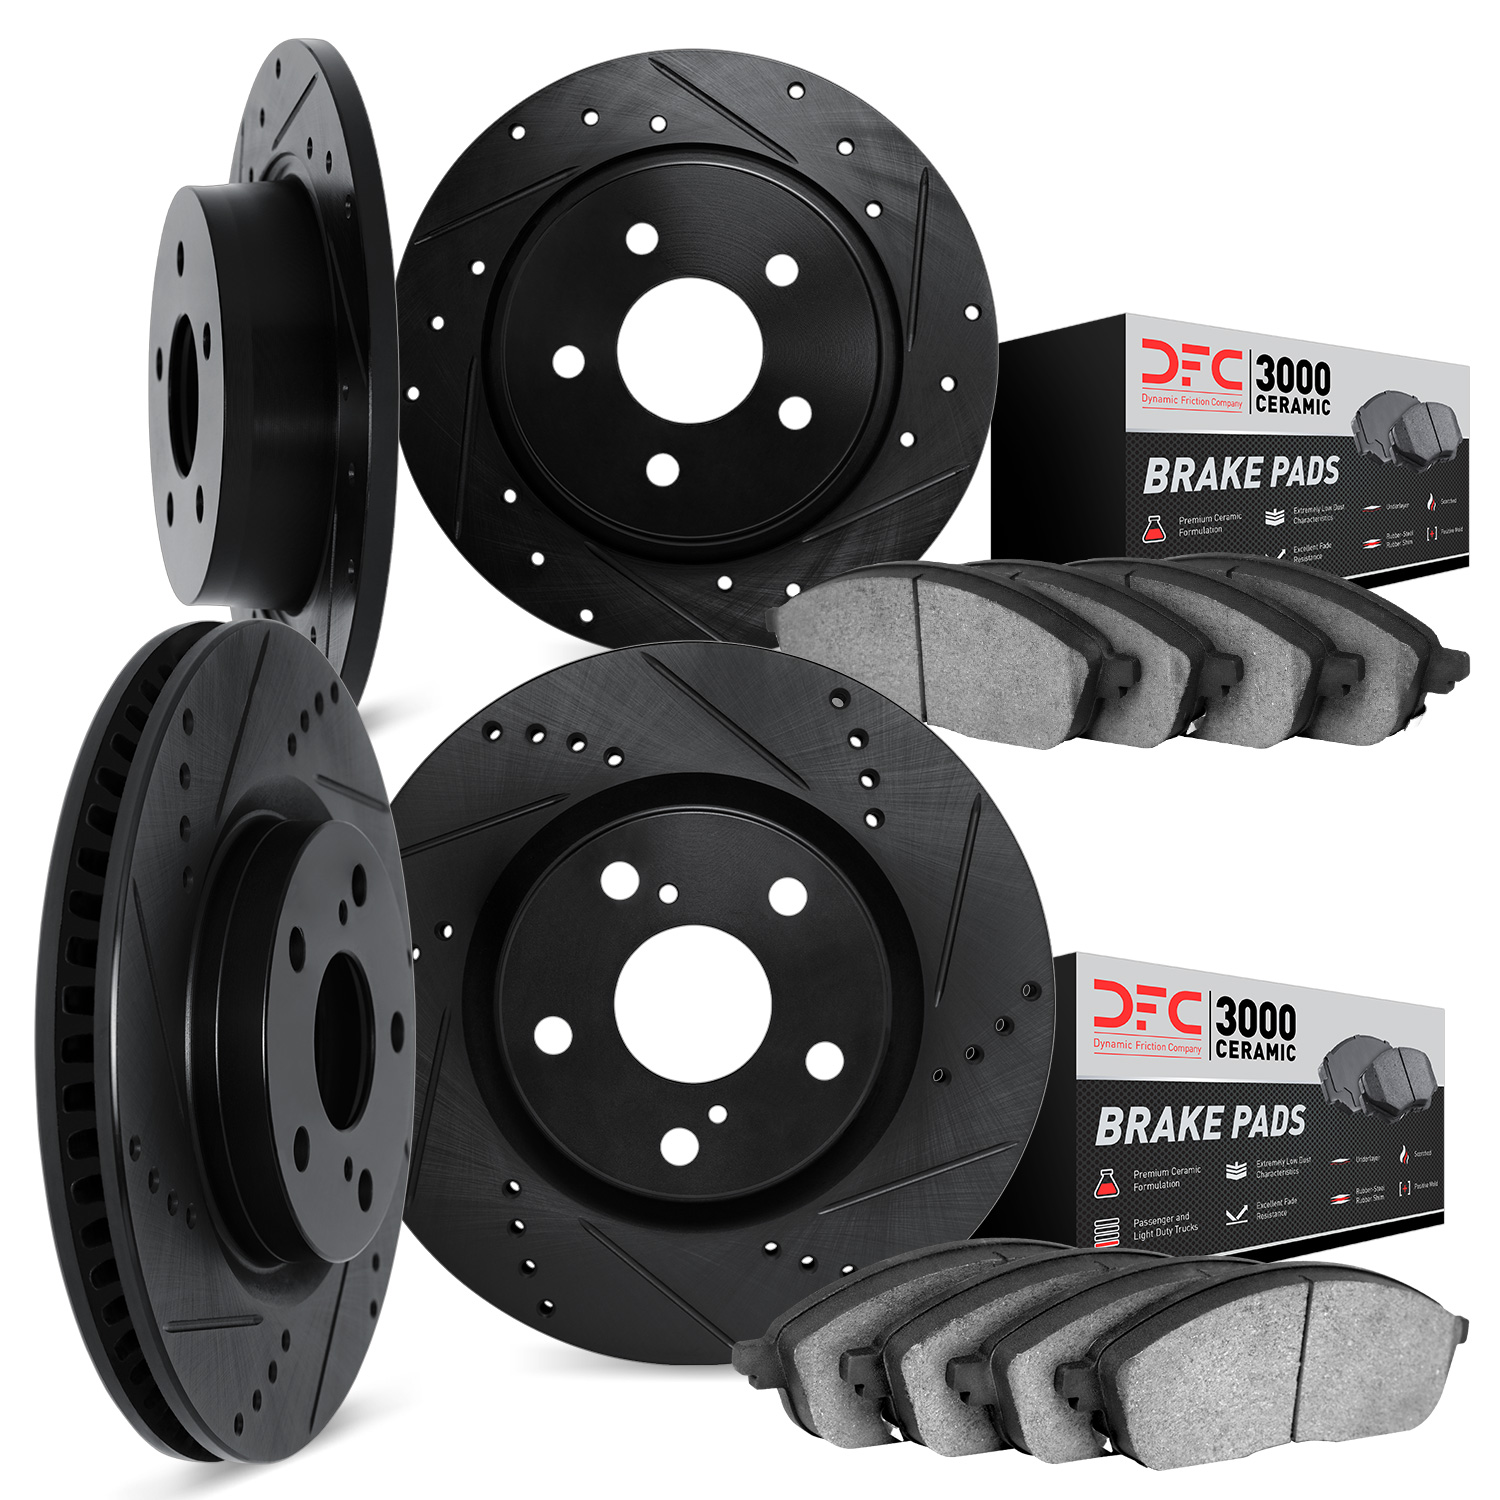 8304-13027 Drilled/Slotted Brake Rotors with 3000-Series Ceramic Brake Pads Kit [Black], 2005-2009 Subaru, Position: Front and R